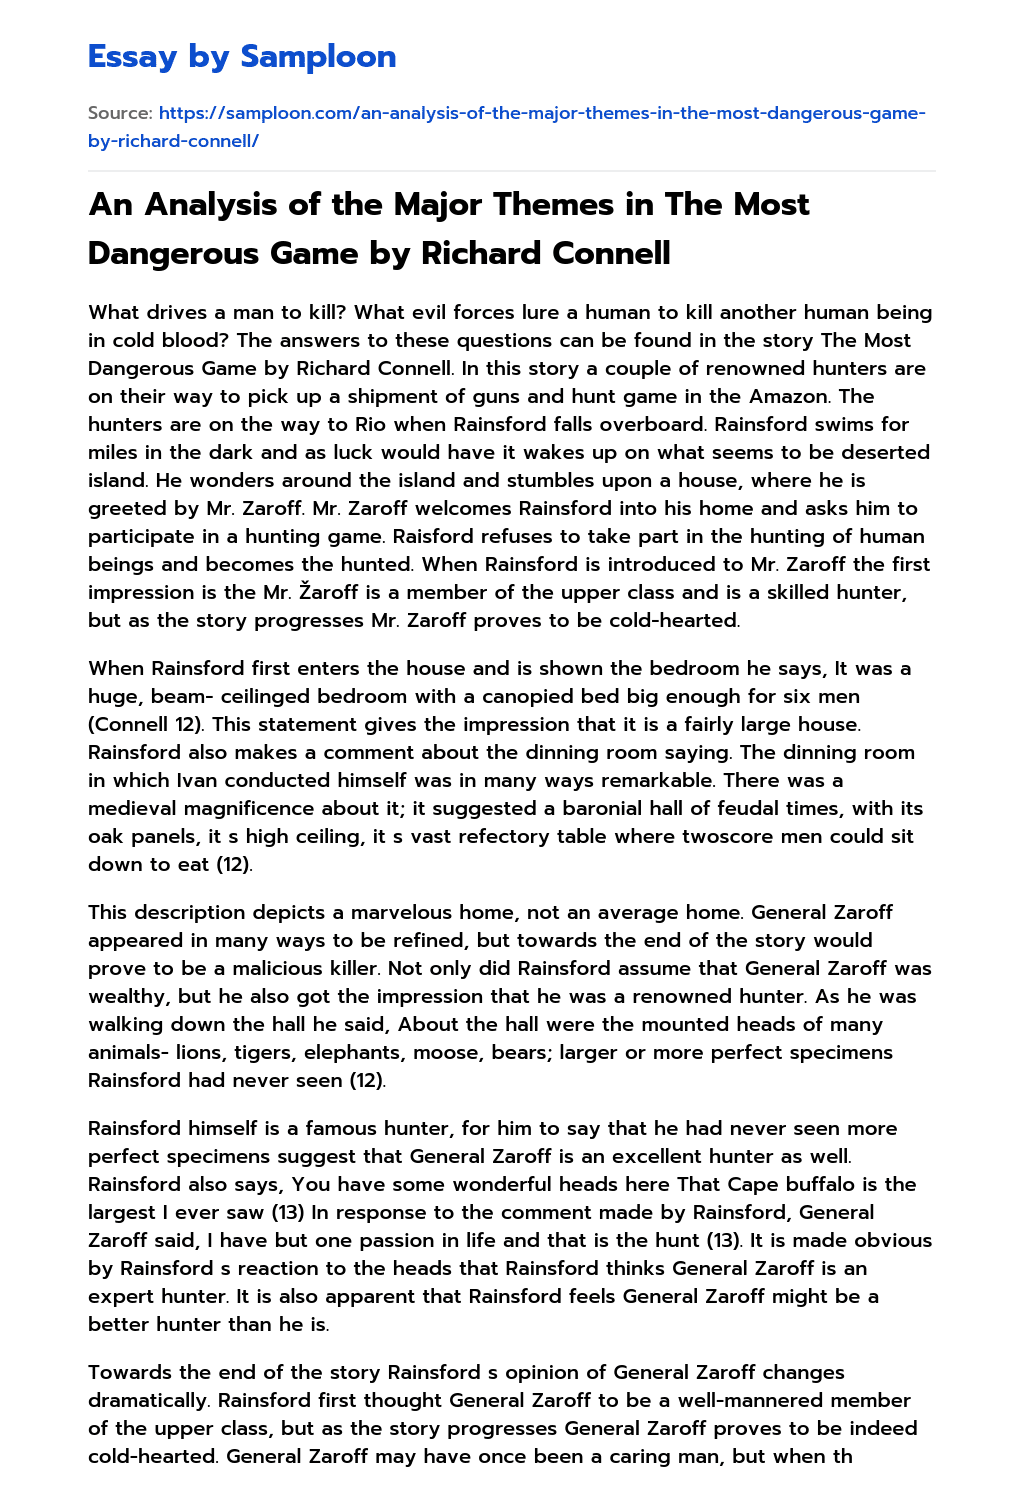 An Analysis of the Major Themes in The Most Dangerous Game by Richard Connell essay